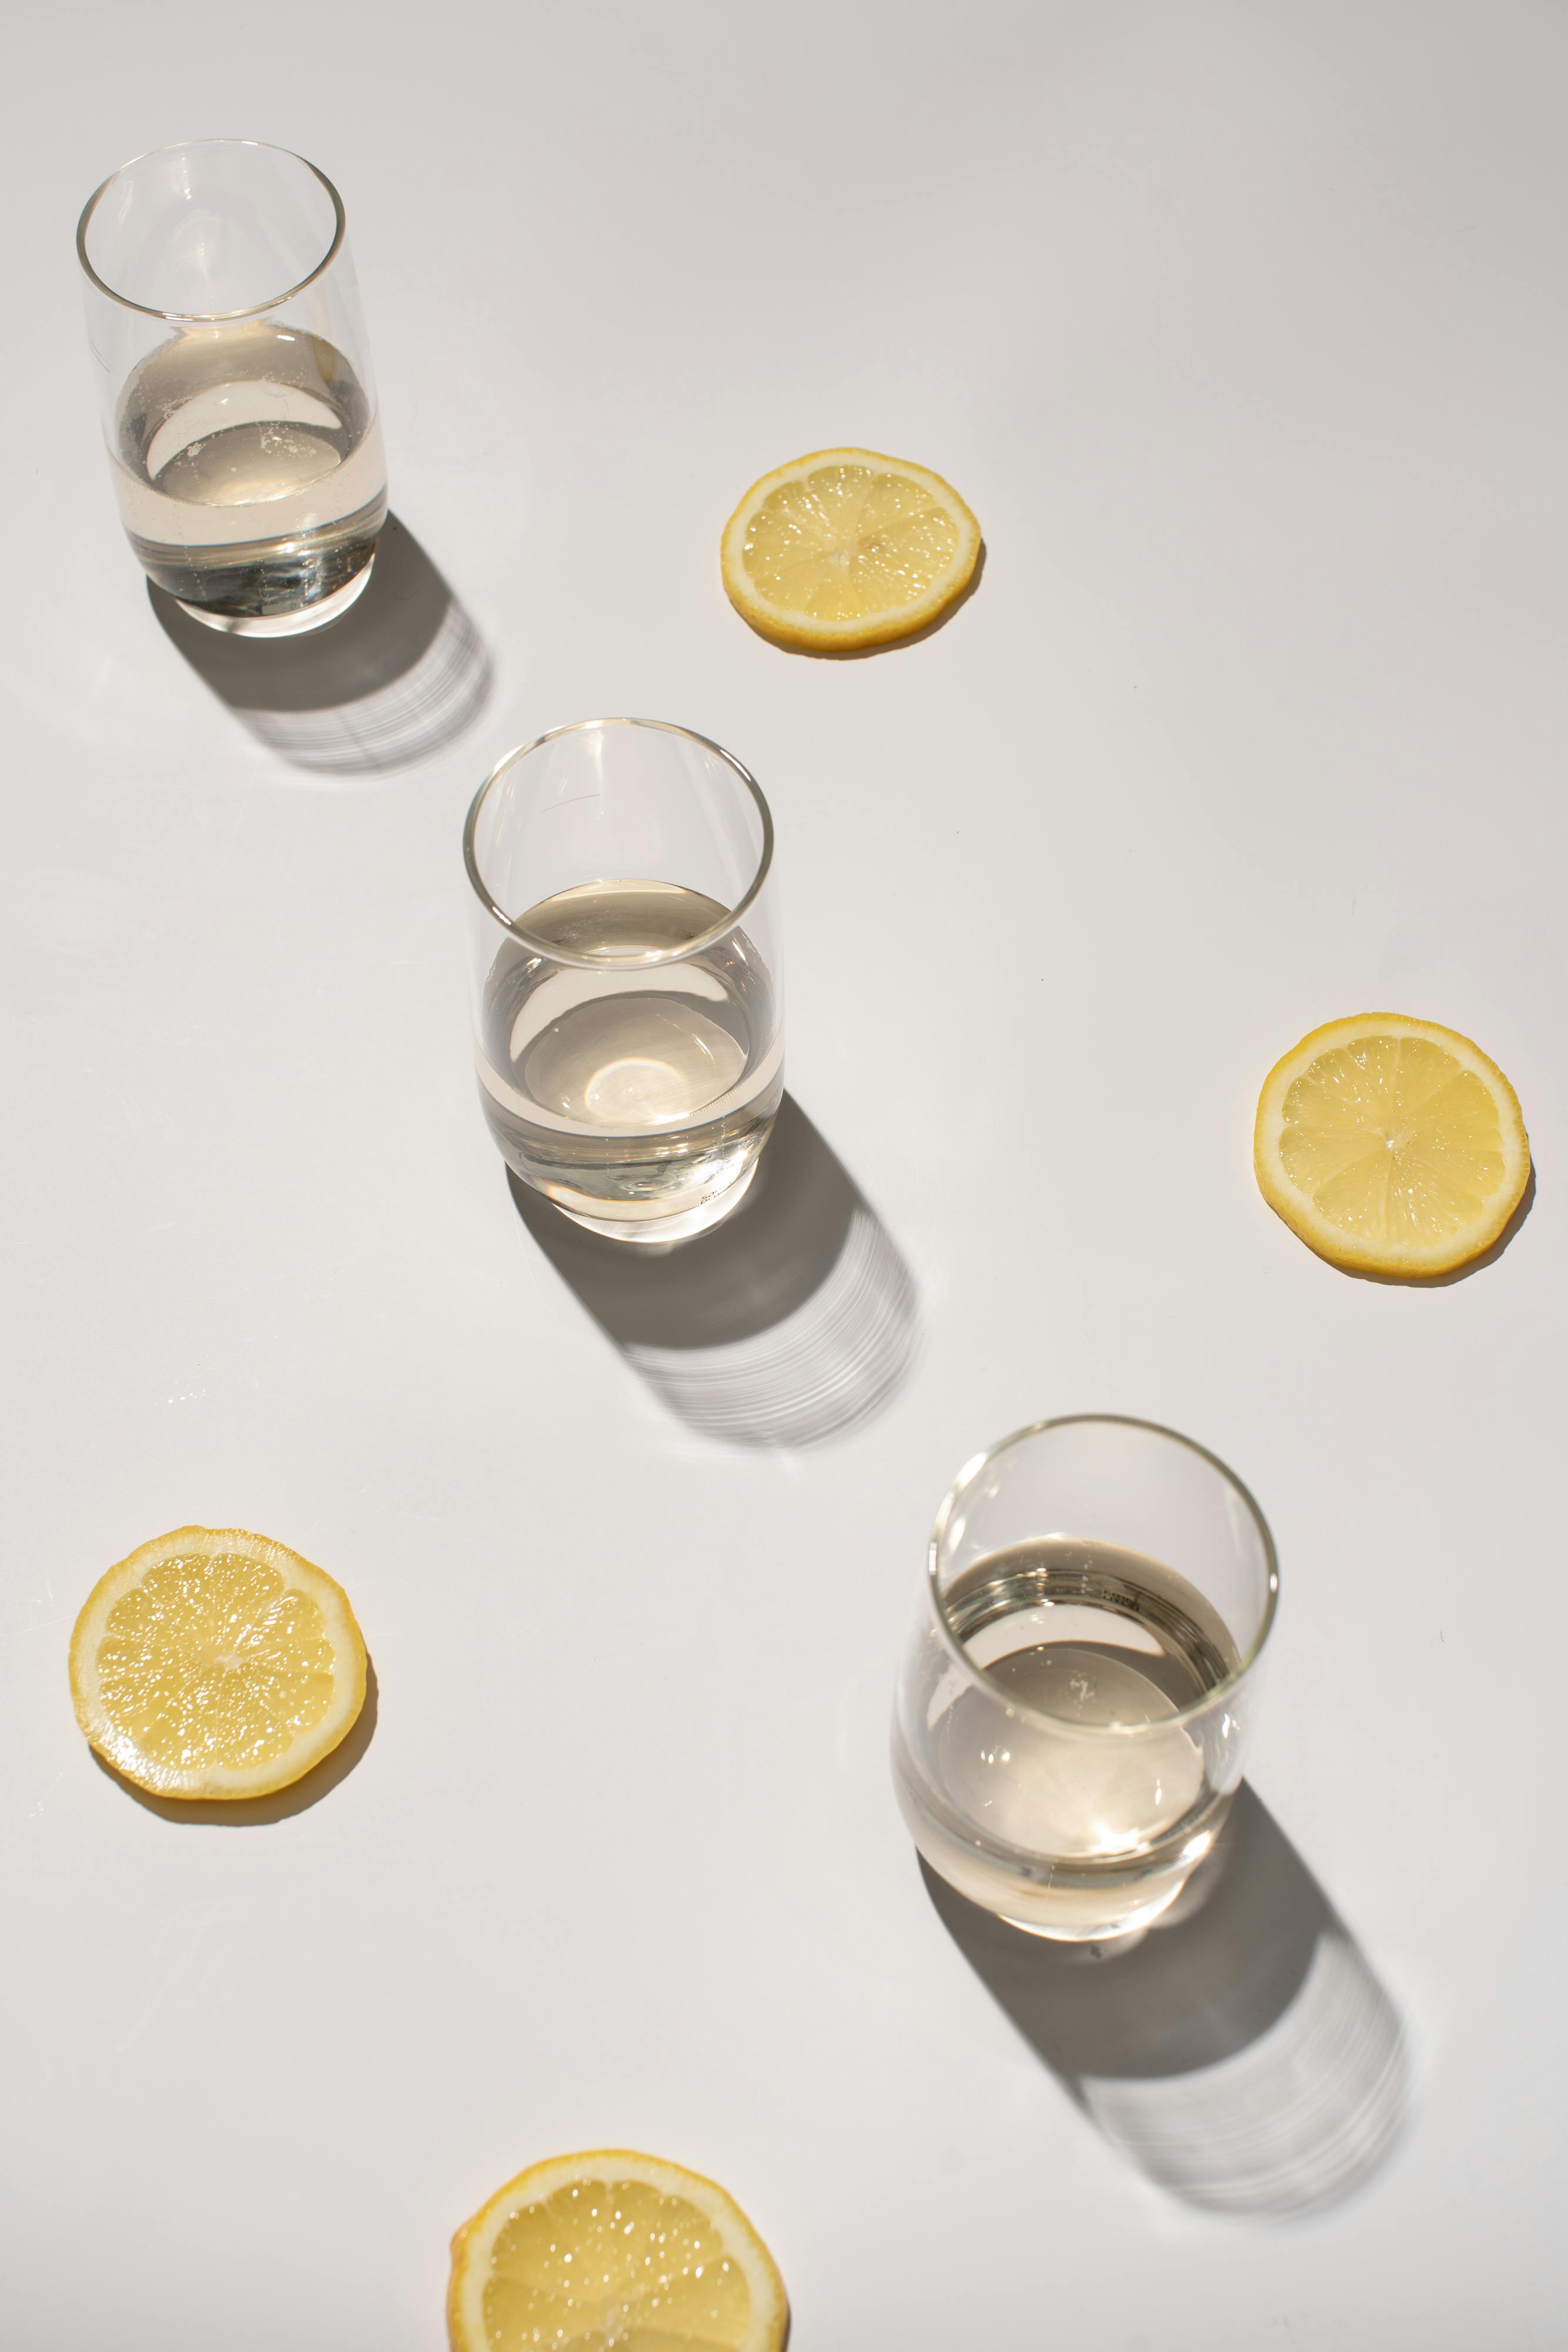 lemon slices near the clear drinking glasses with liquid